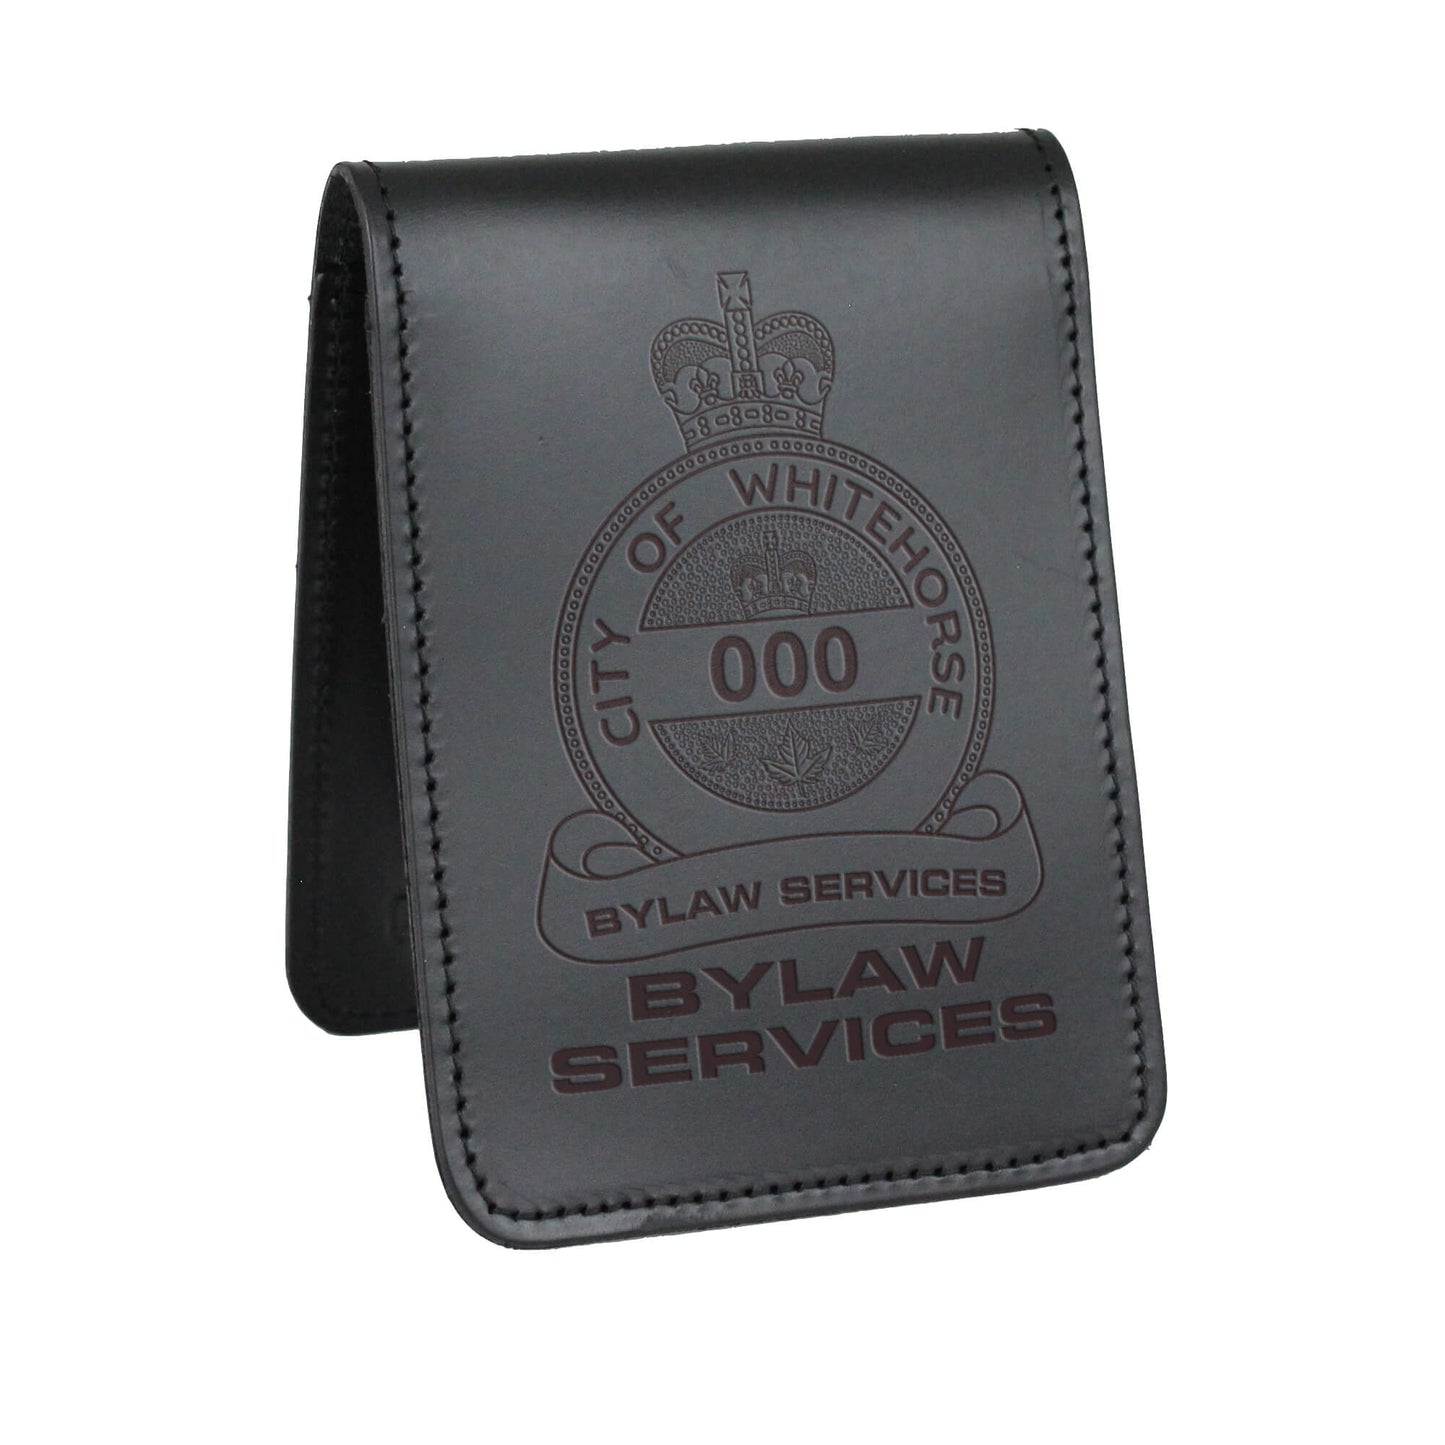 Whitehorse Bylaw Services Notebook Cover